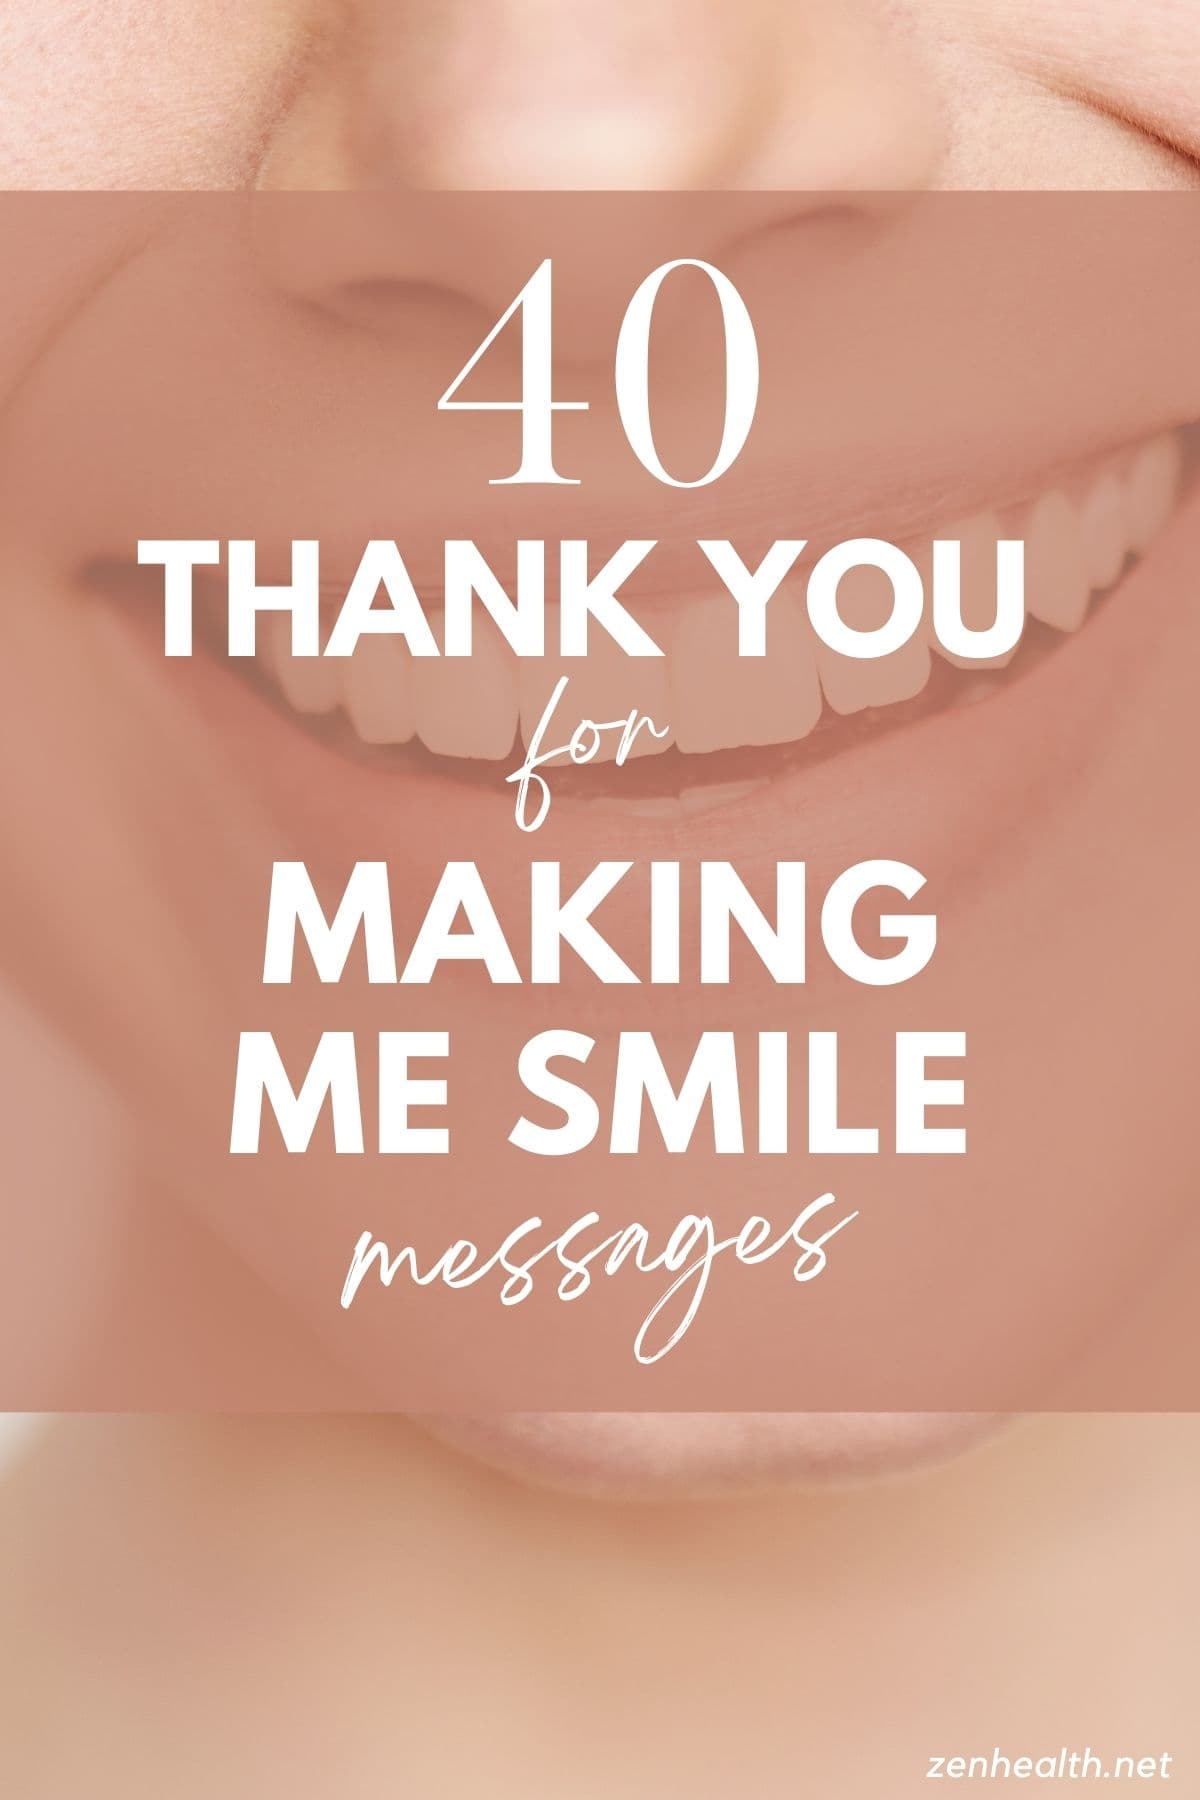 40 thank you for making me smile messages text overlay on the face of a woman smiling